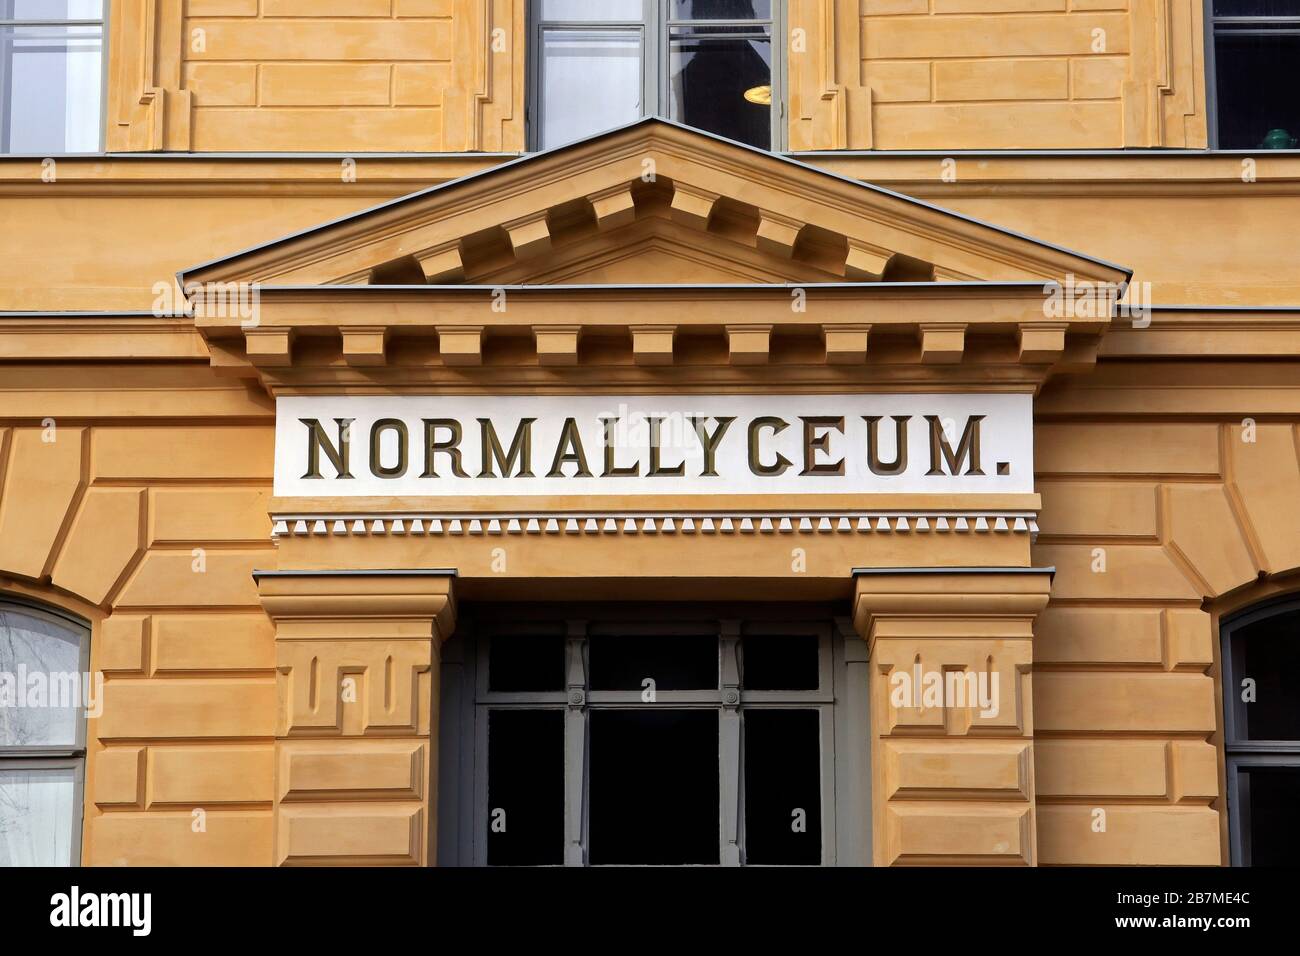 Normal Lyceum of Helsinki, Finland. Finland is closing schools on March 18, moving to distance learning, in effort to limit the spread of coronavirus. Helsinki, Finland. March 17, 2020. Stock Photo